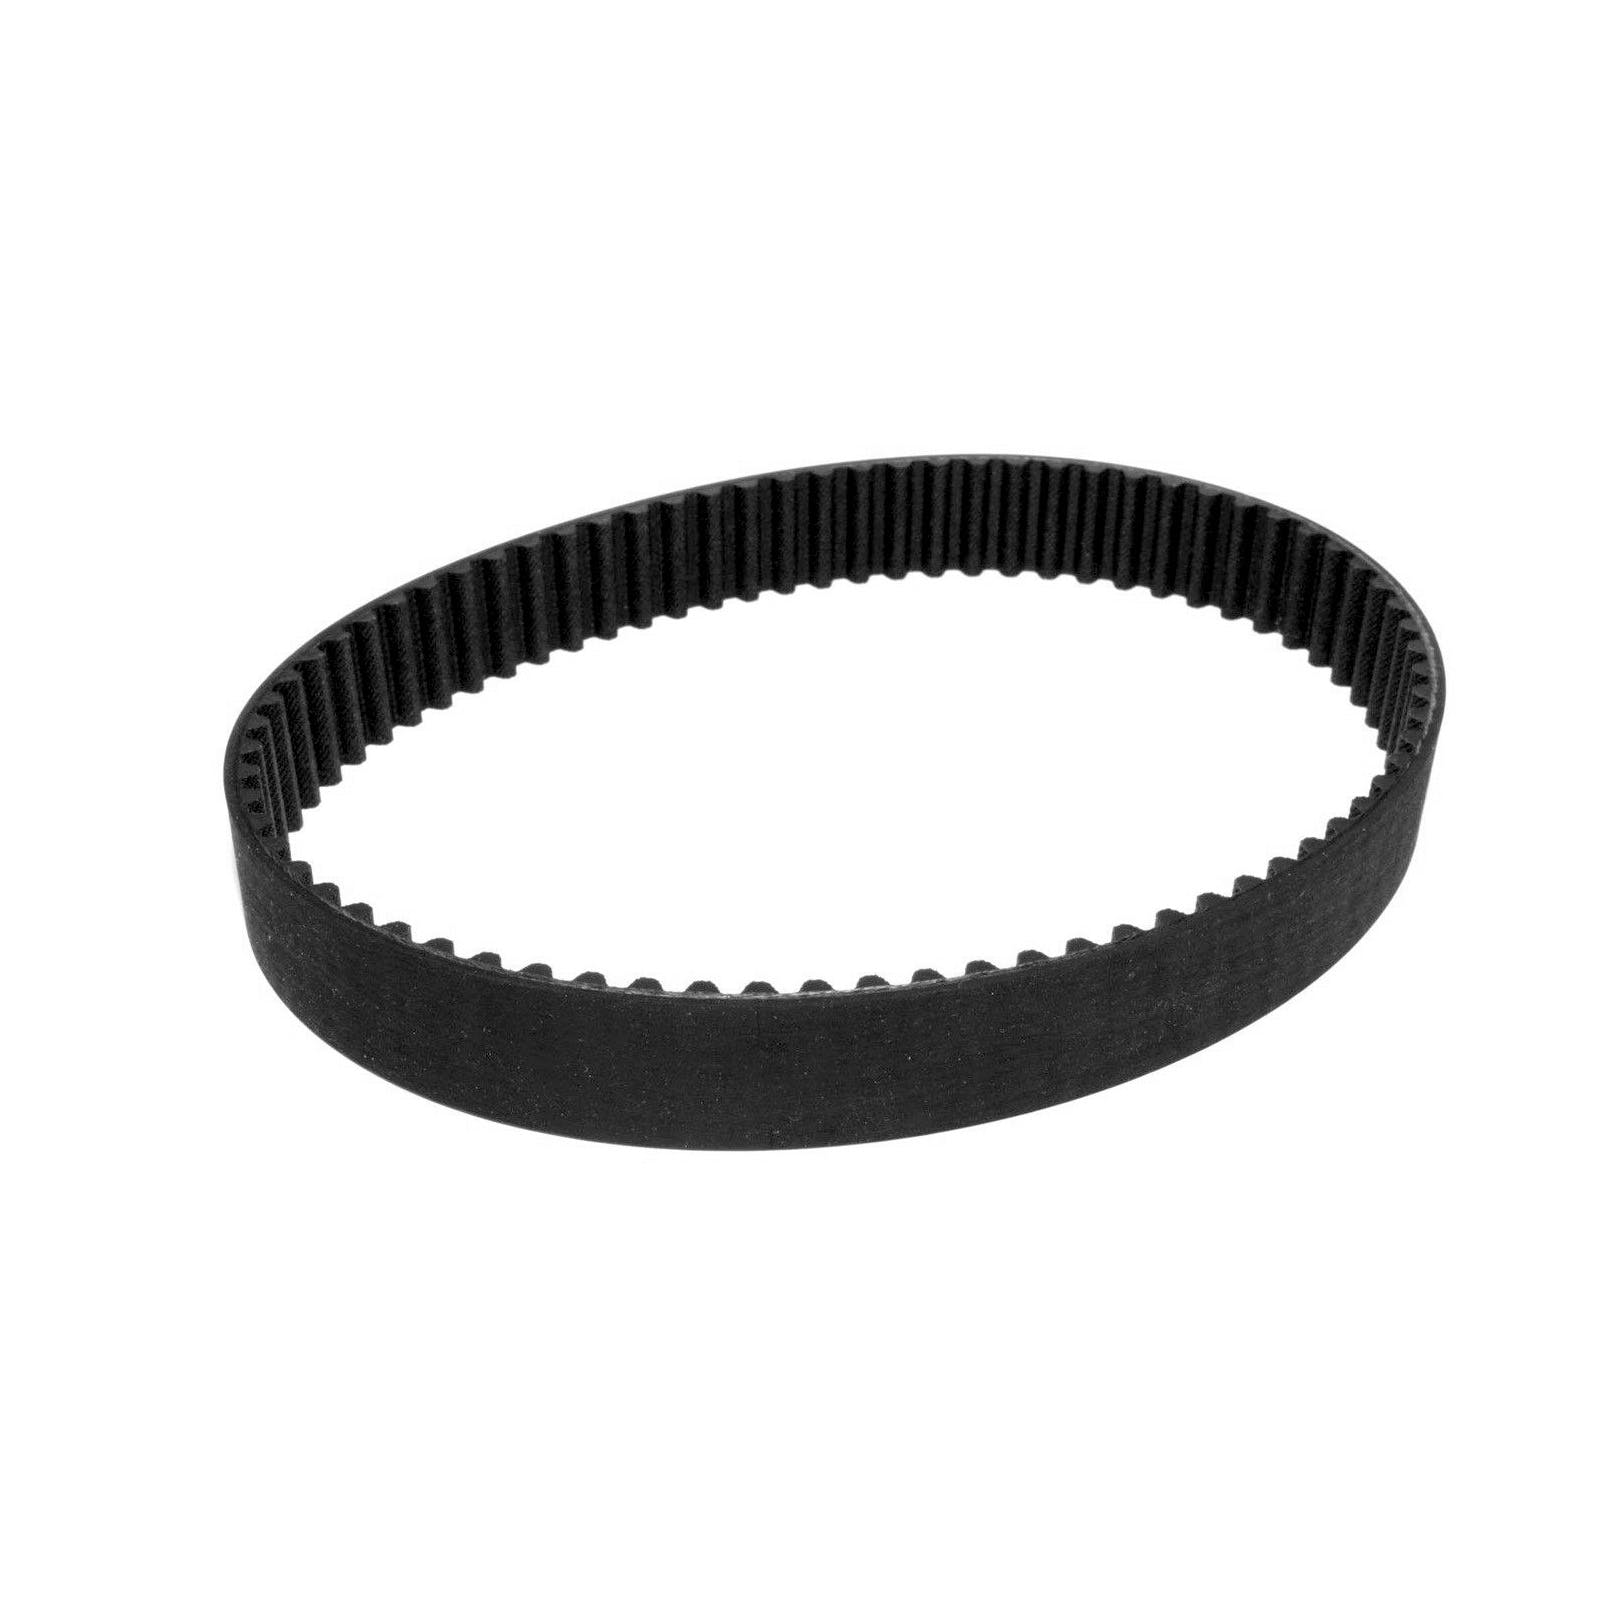 Speedmaster PCE629.1005 75-Tooth 26mm X 603.25mm Timing Belt Drive Replacement Belt